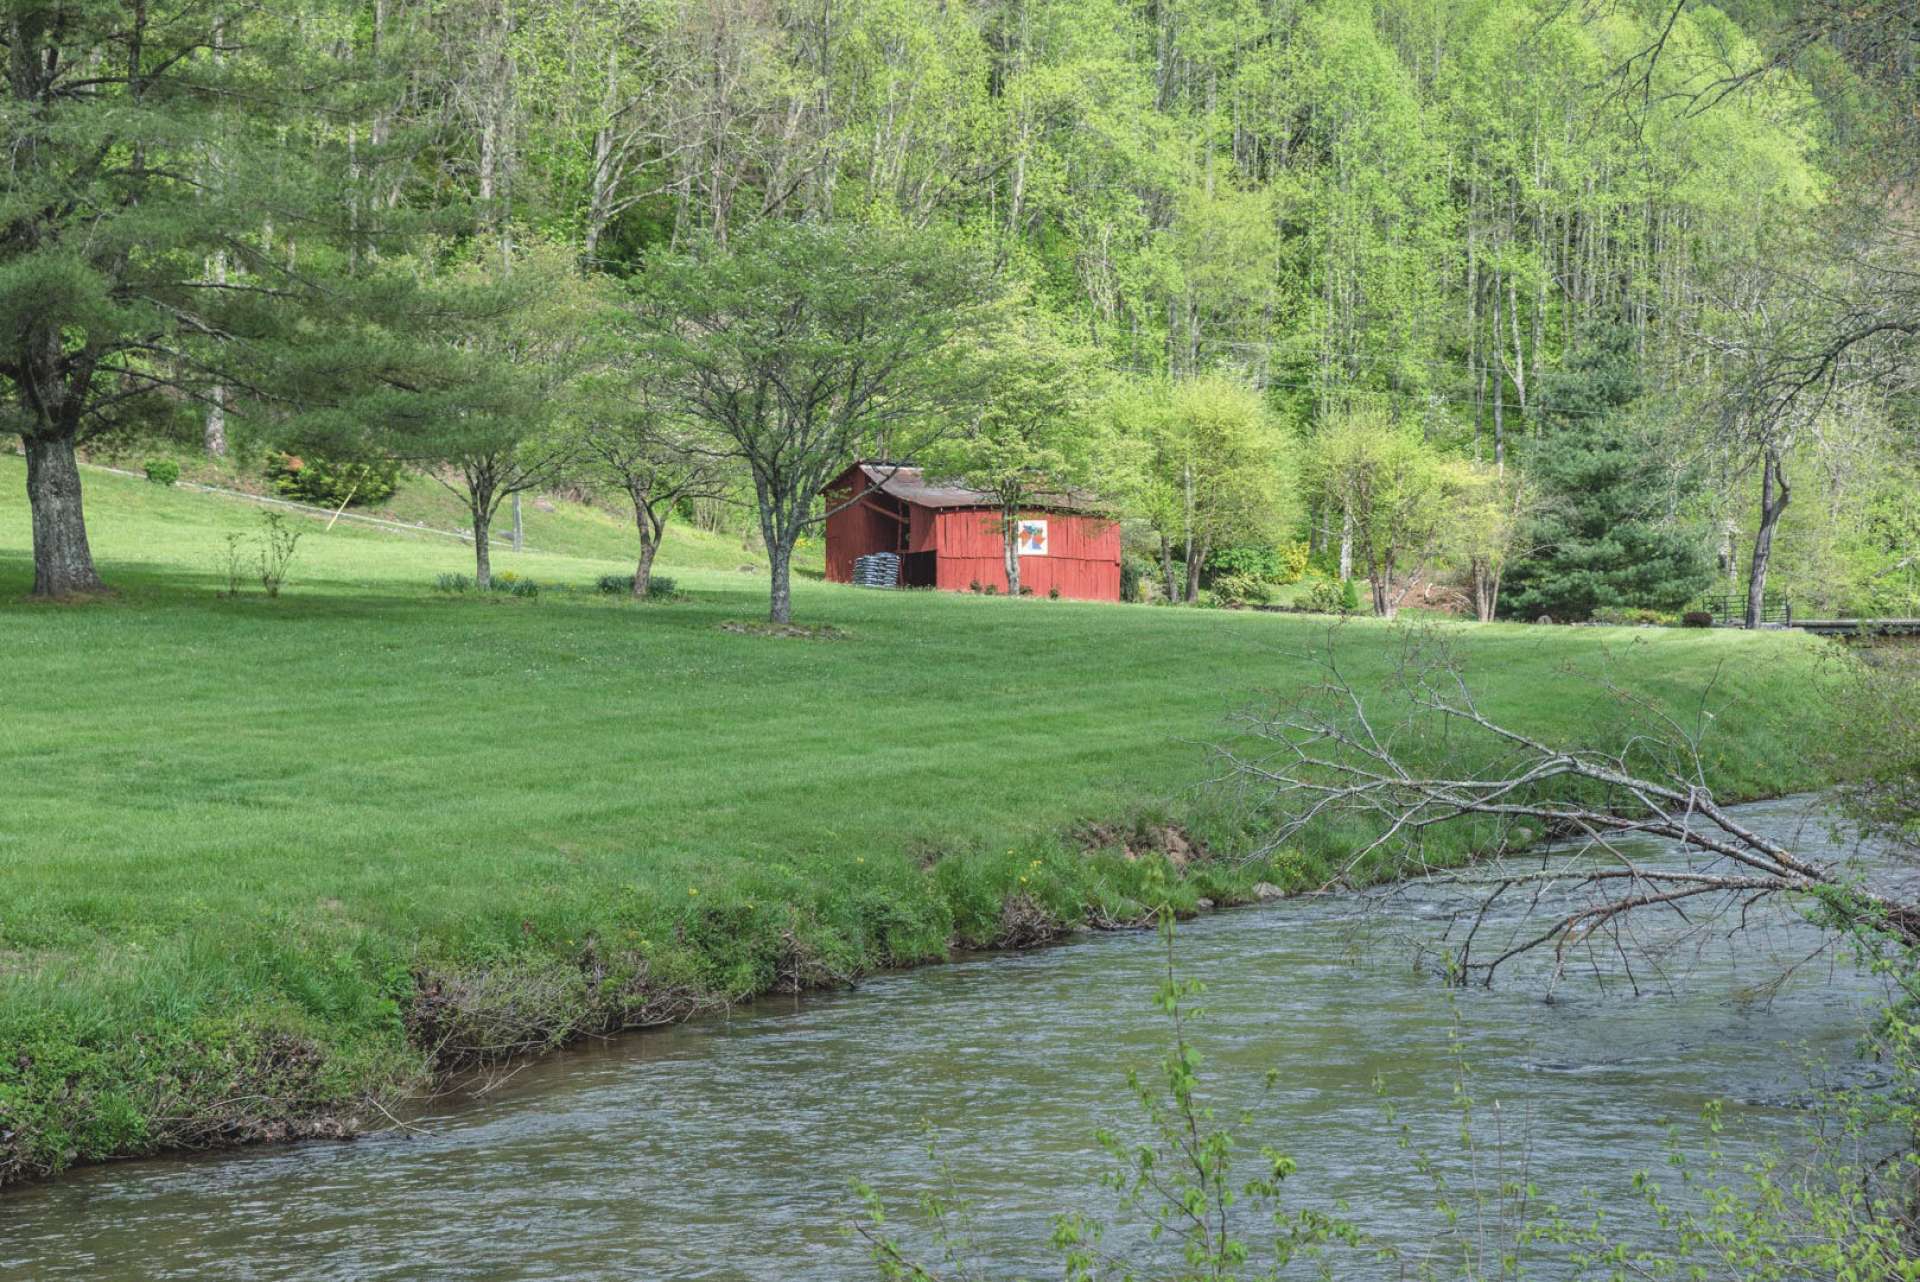 Even a barn for livestock or equipment storage.  And then there is the creek! Owner says you can launch your kayak or tubes and float to the New River near by.